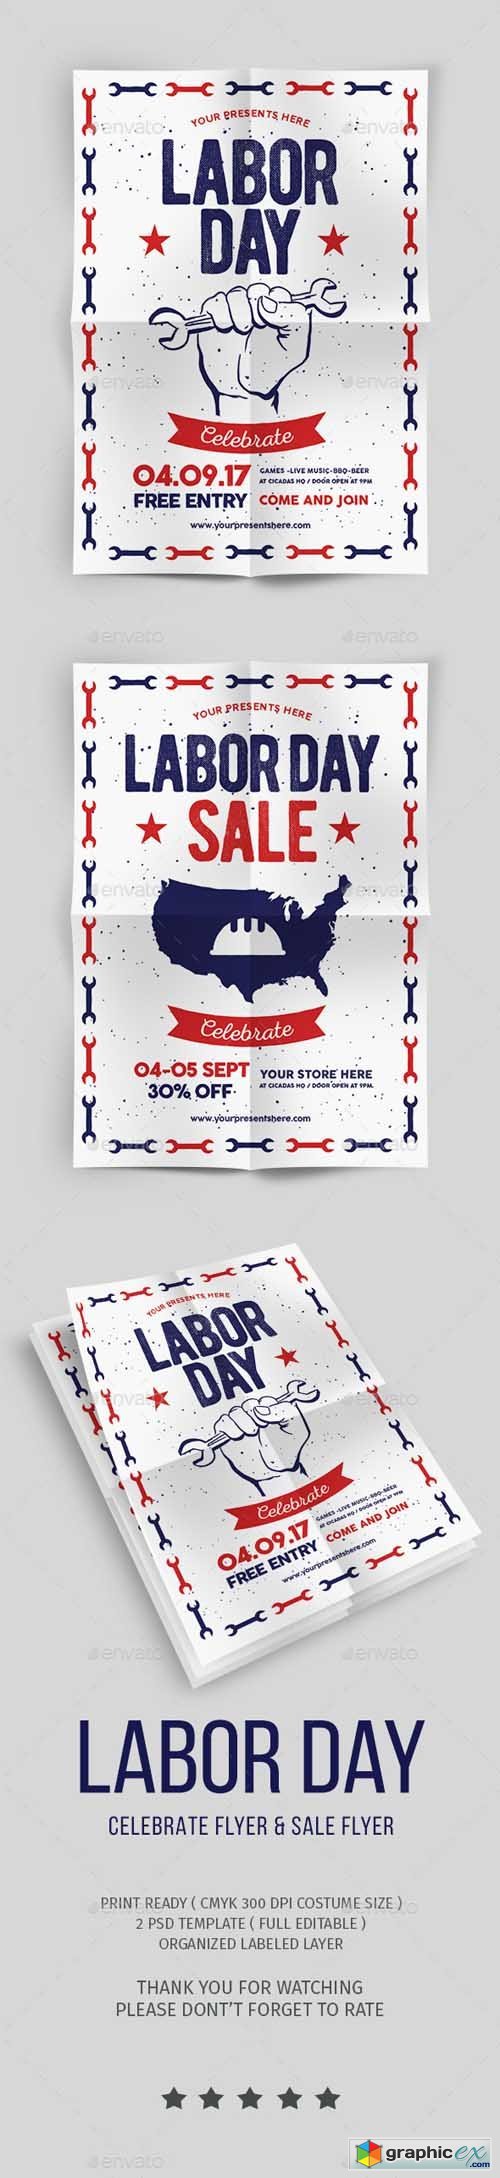 Labor Day Flyer & labor Day Sale Flyer